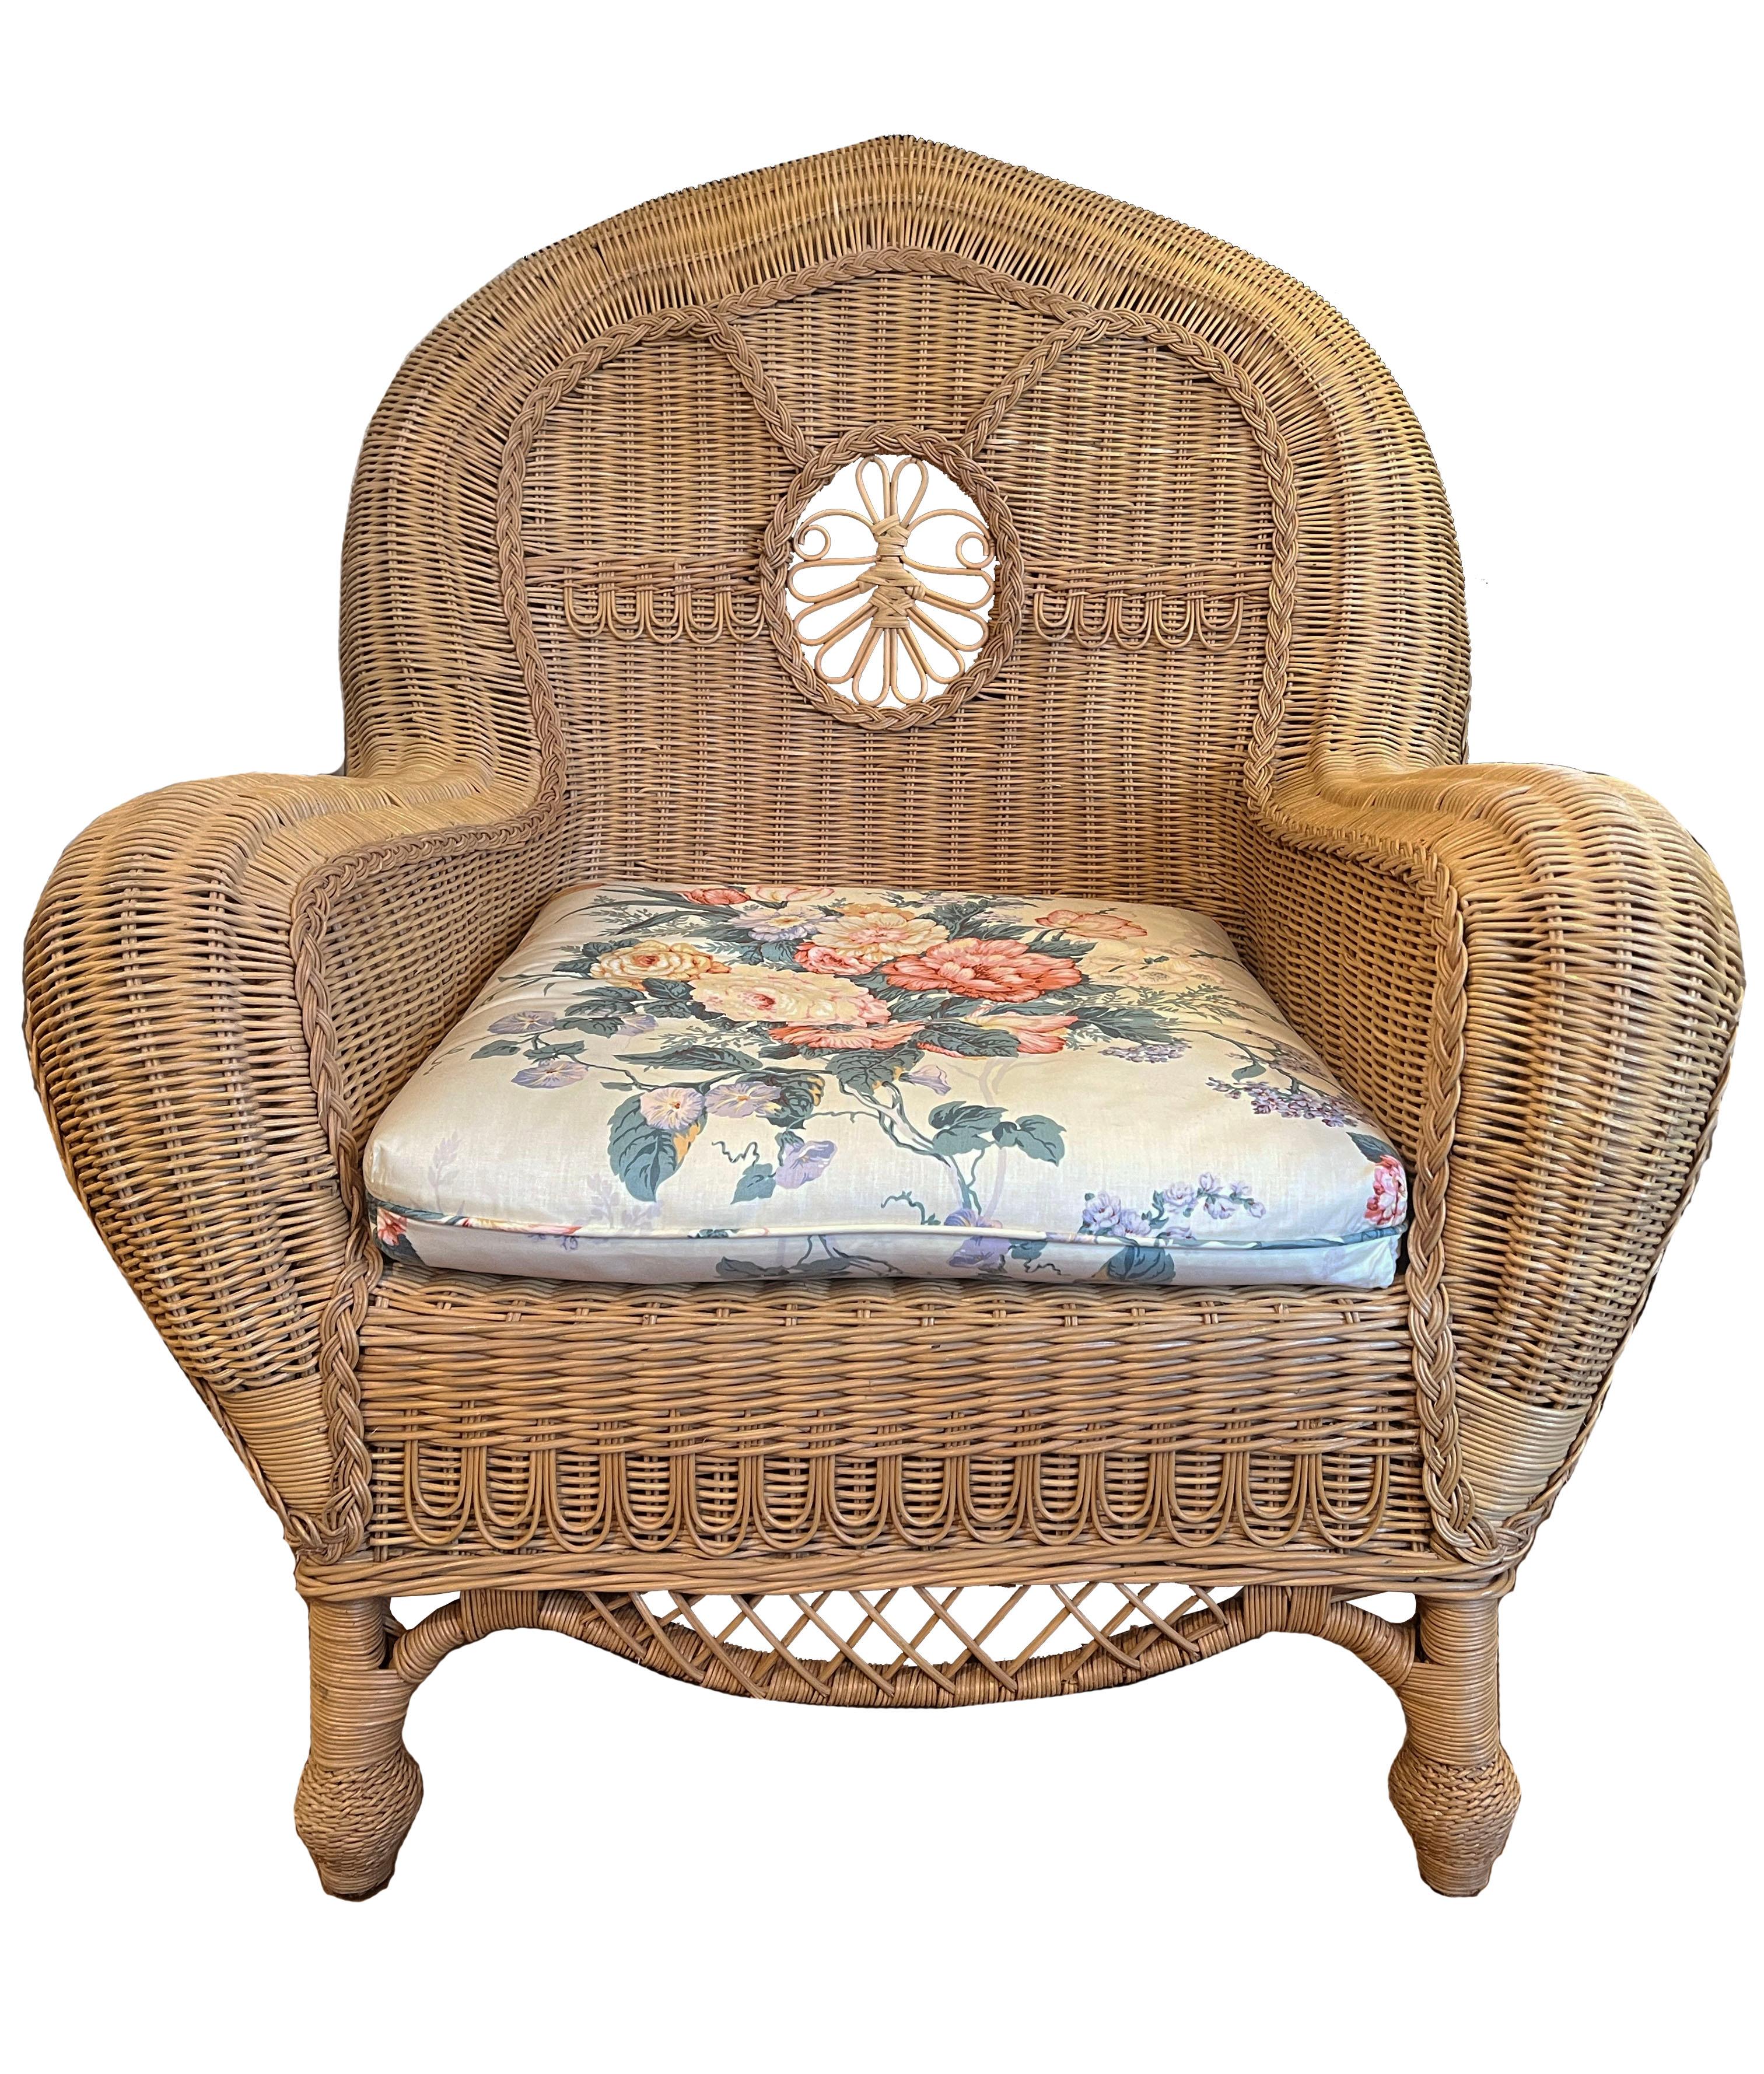 Pair of Large Wicker Armchairs w/ fitted upholstered seat cushion. Seat cushion is removable. From Andre Leon Talley's Collection.

A striking pair of large wicker armchairs, meticulously crafted to embody both elegance and comfort. Woven with